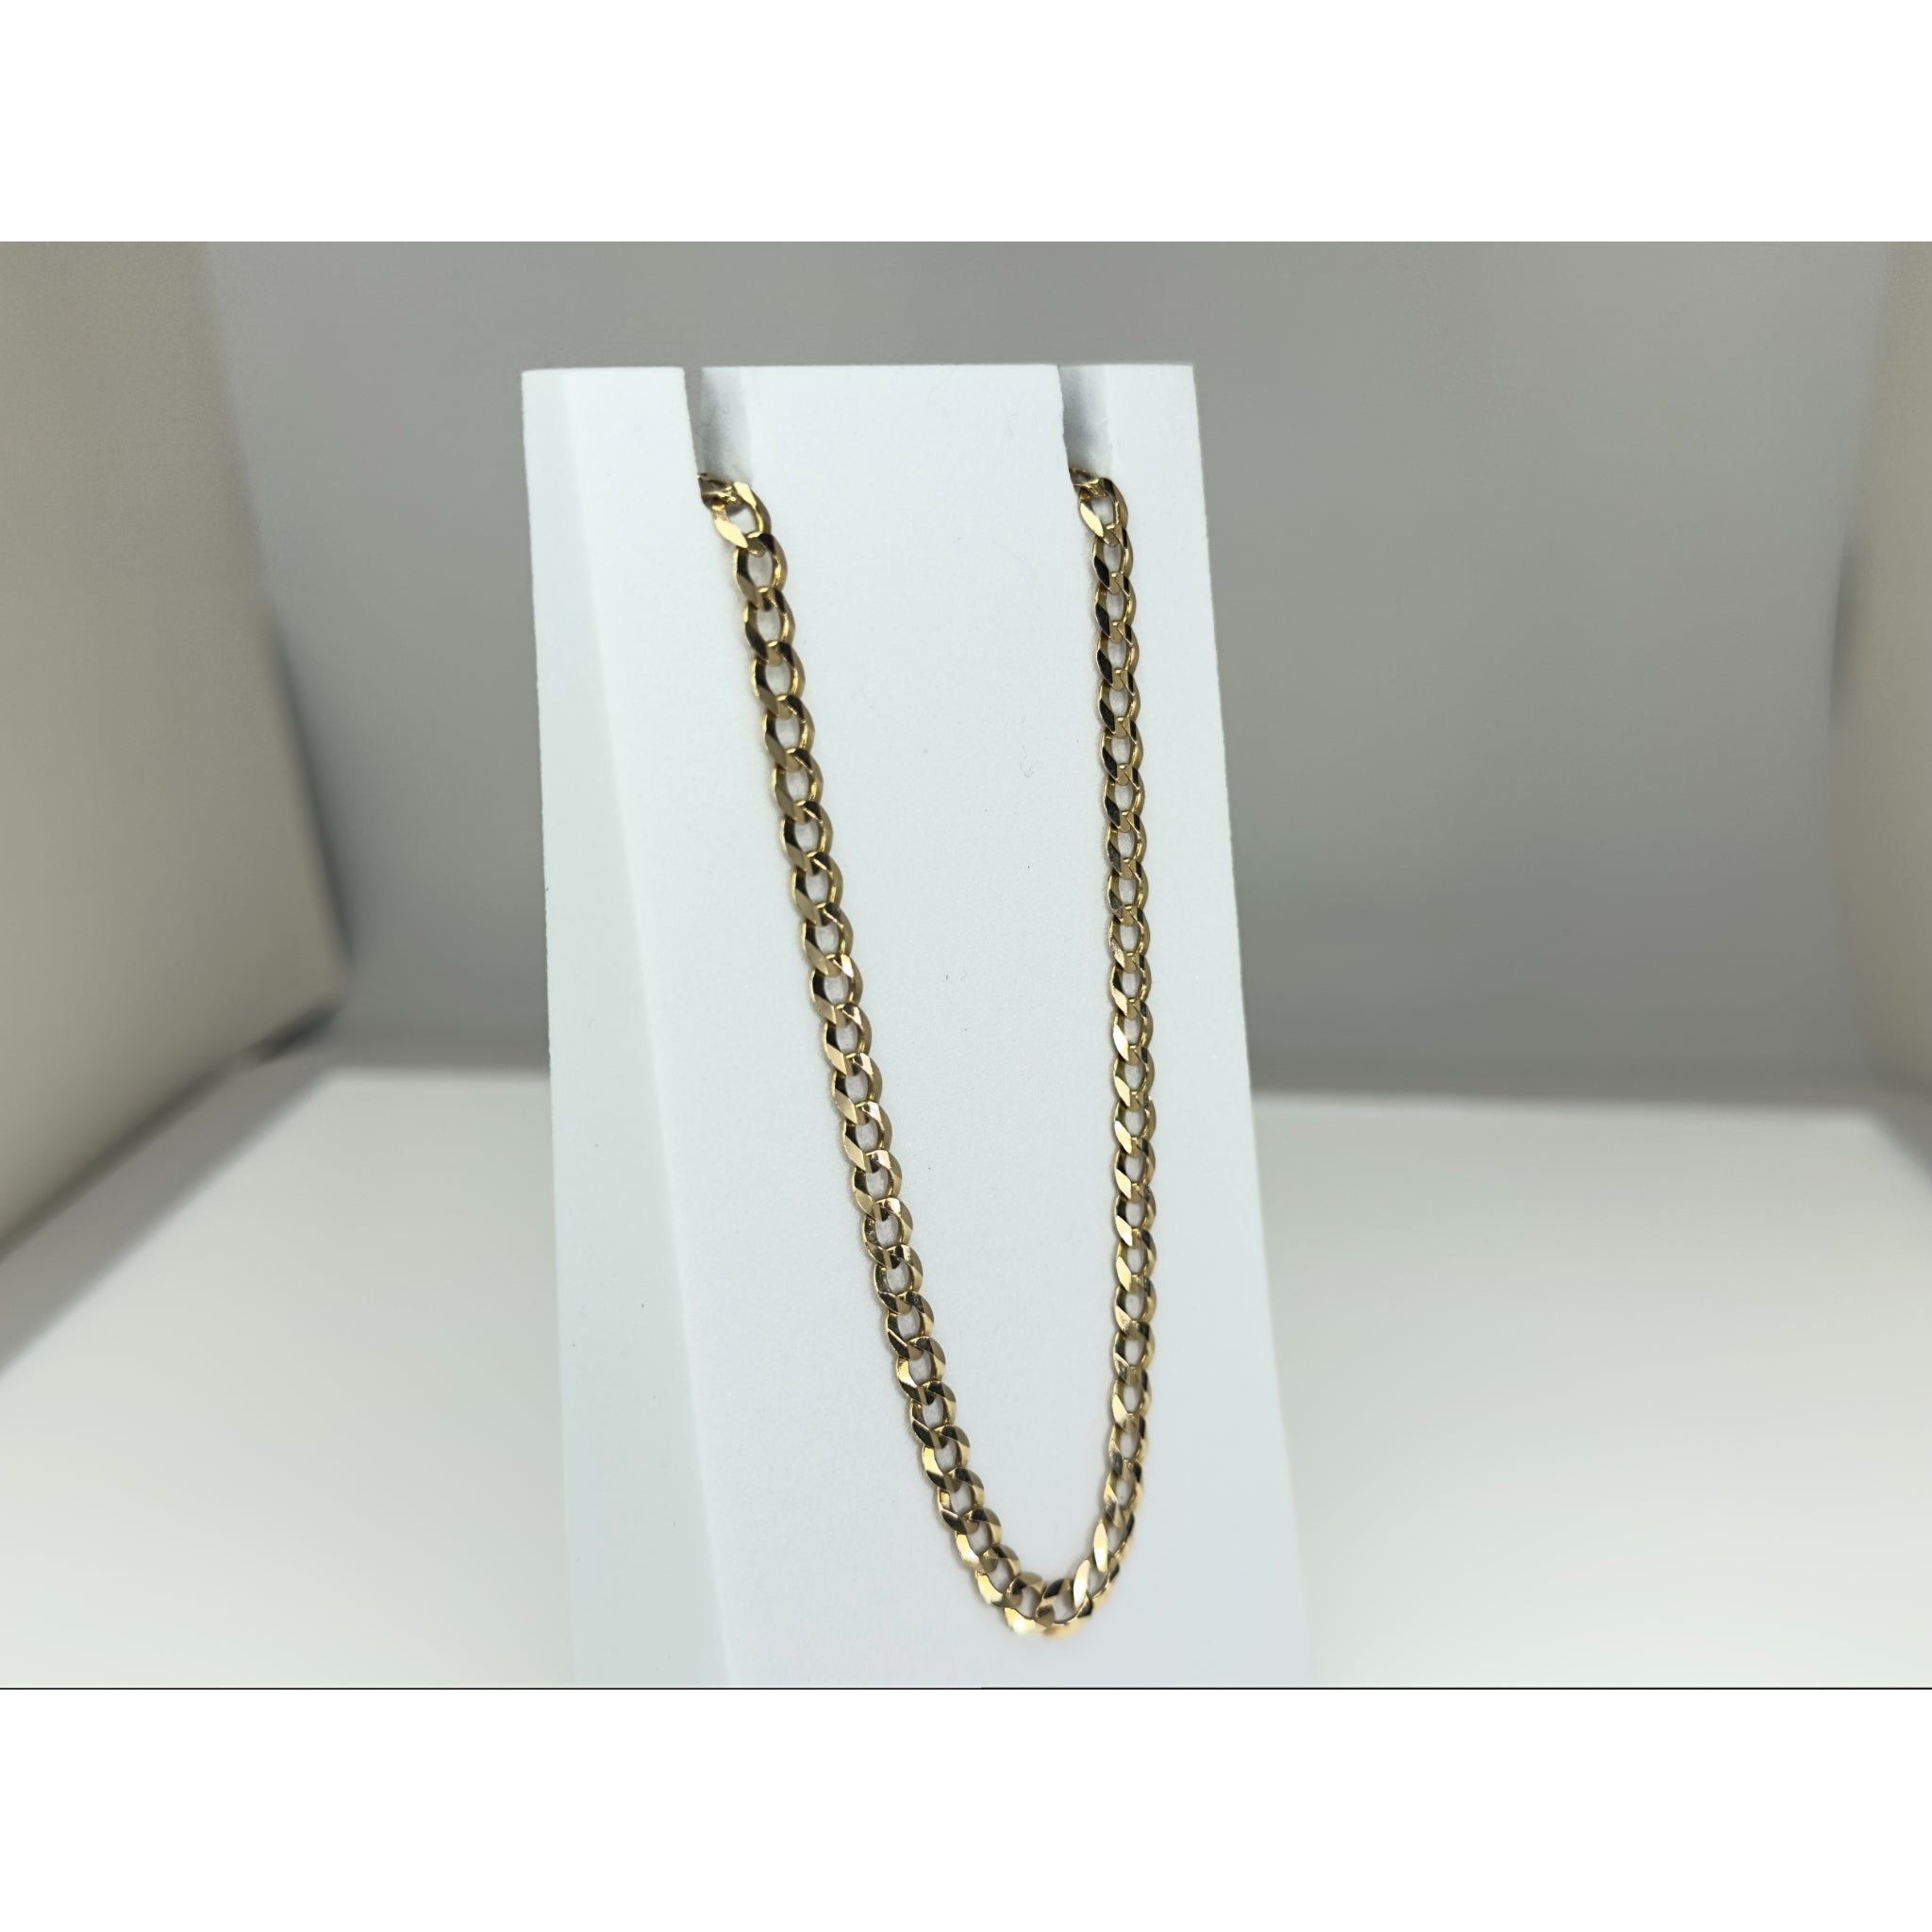 DR1724 - 14K Yellow Gold - Men's Gold Chains